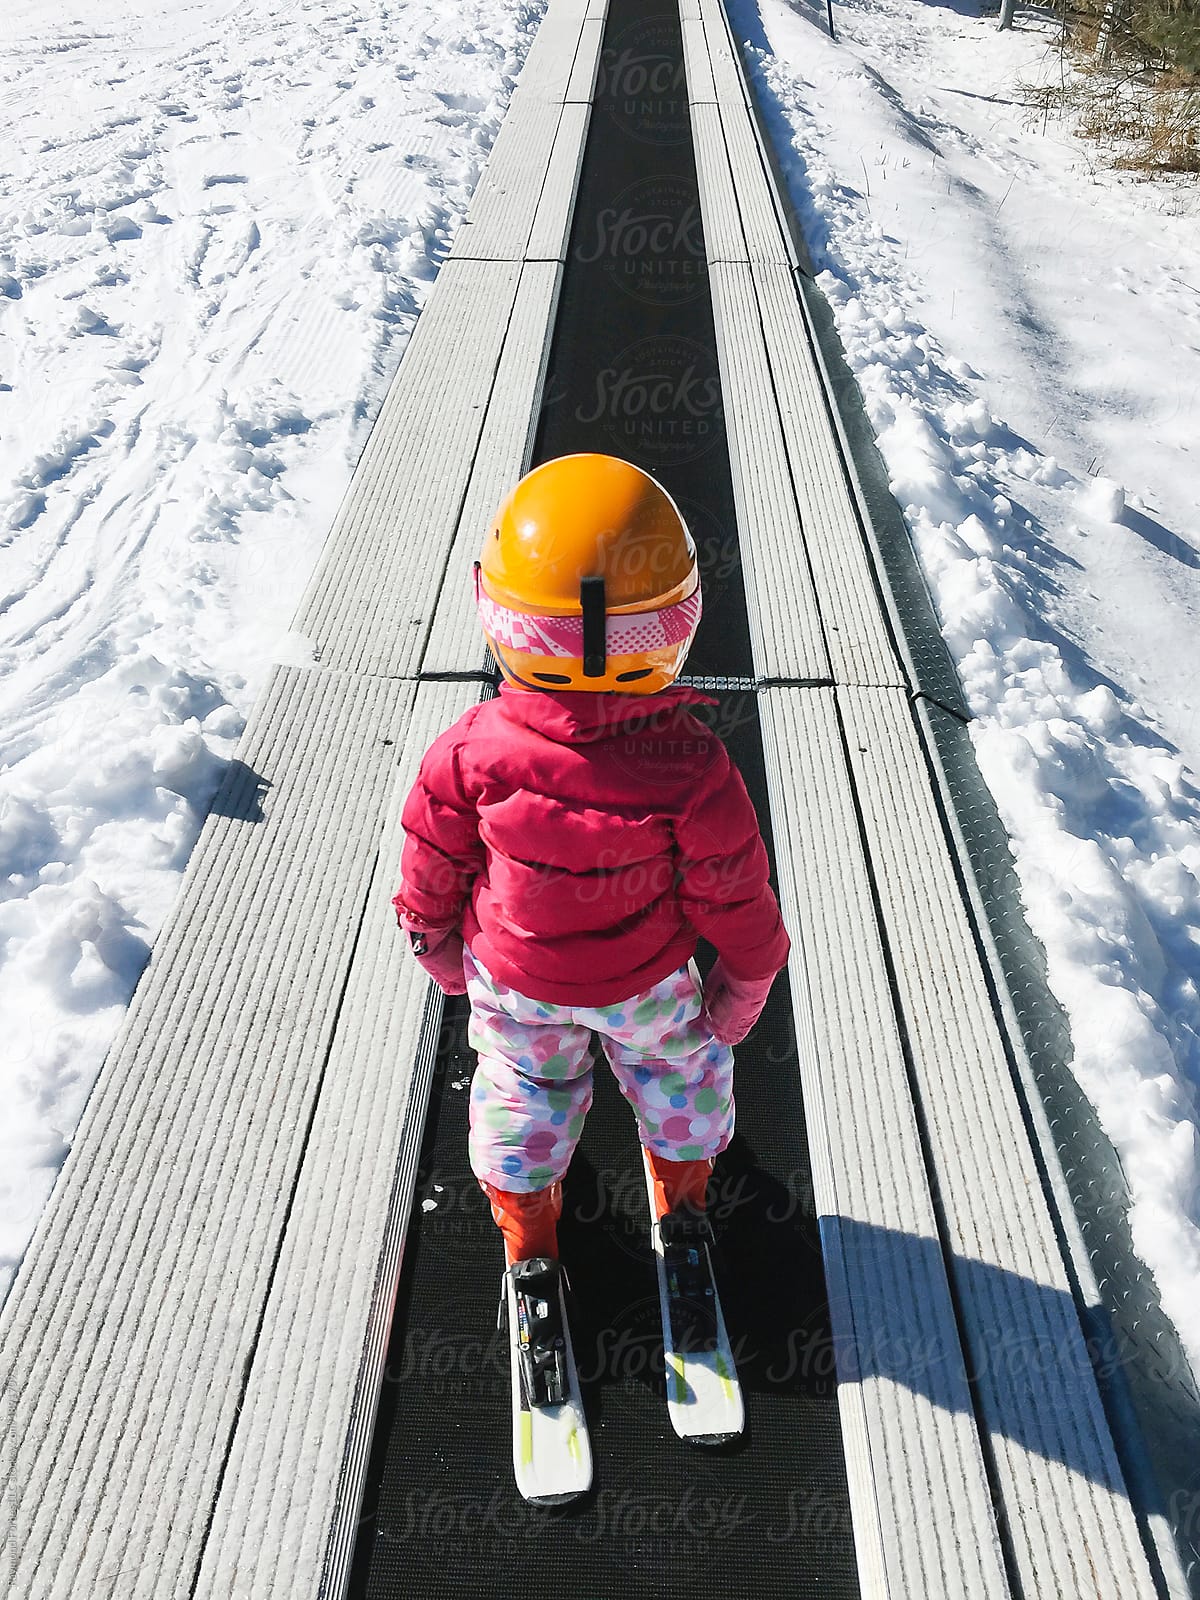 User-generated content Child Riding Ski Lift on First Day Skiing